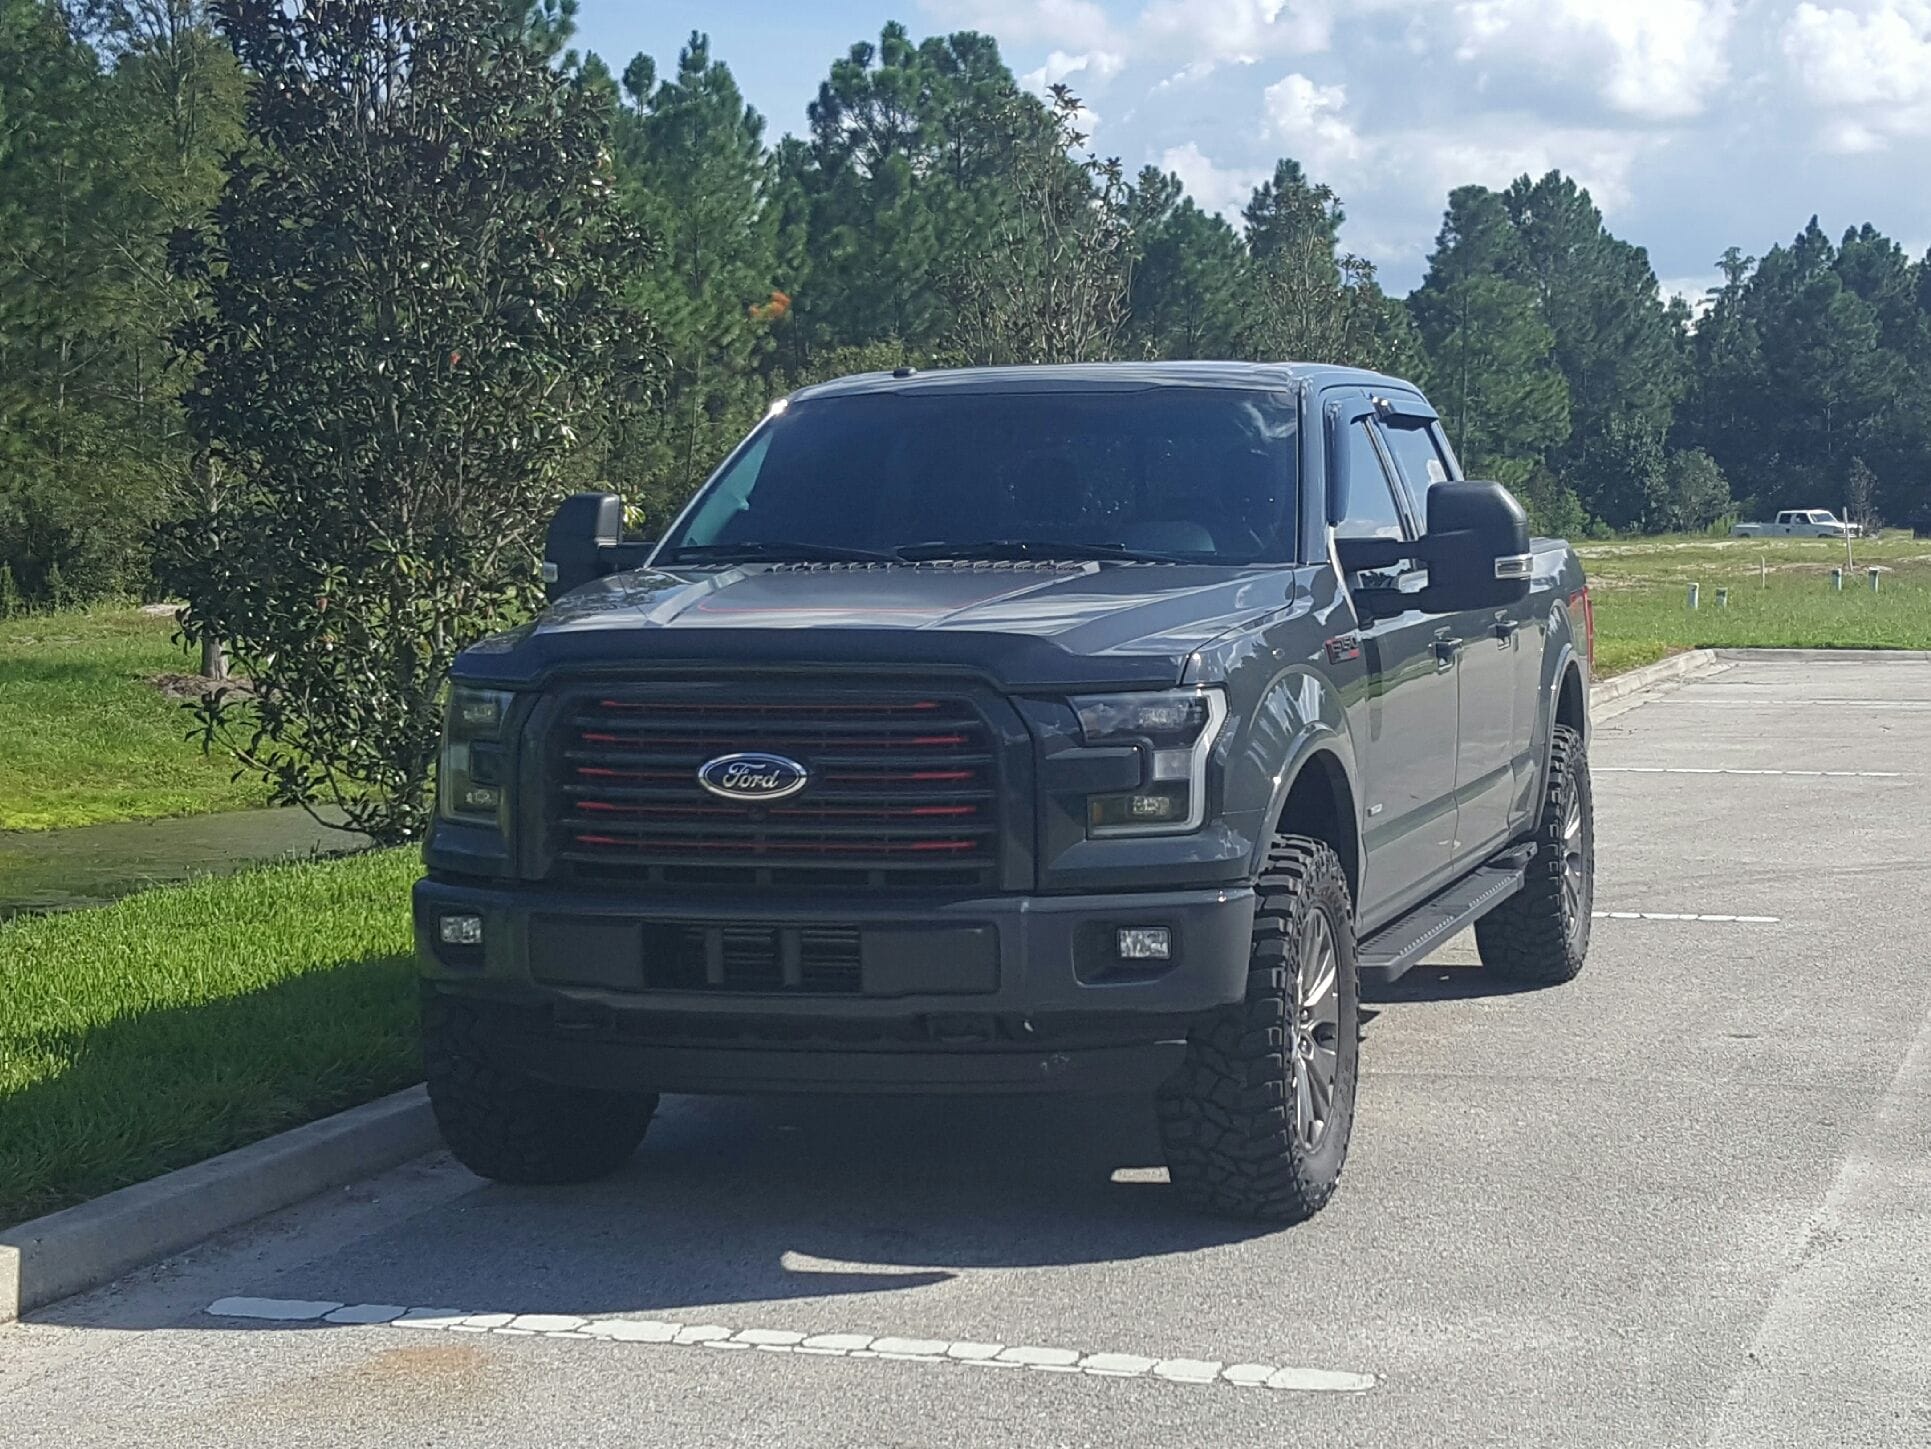 Wheel Spacer PICTURE requests! - Page 2 - Ford F150 Forum - Community